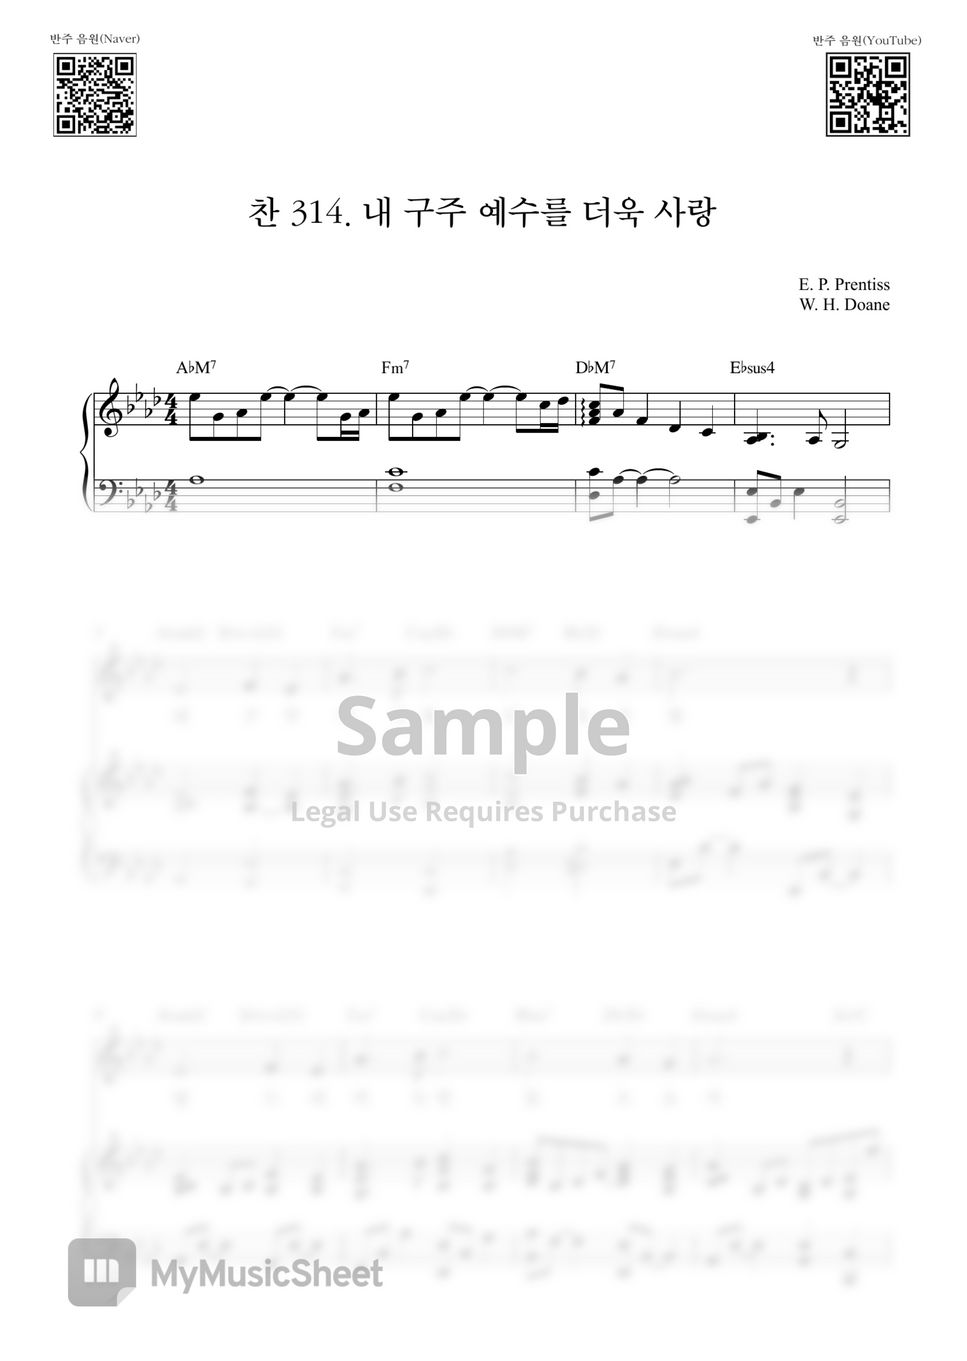 Hymn - 내 구주 예수를(More Love to Thee)_Ab Key (Piano Cover) by Samuel Park